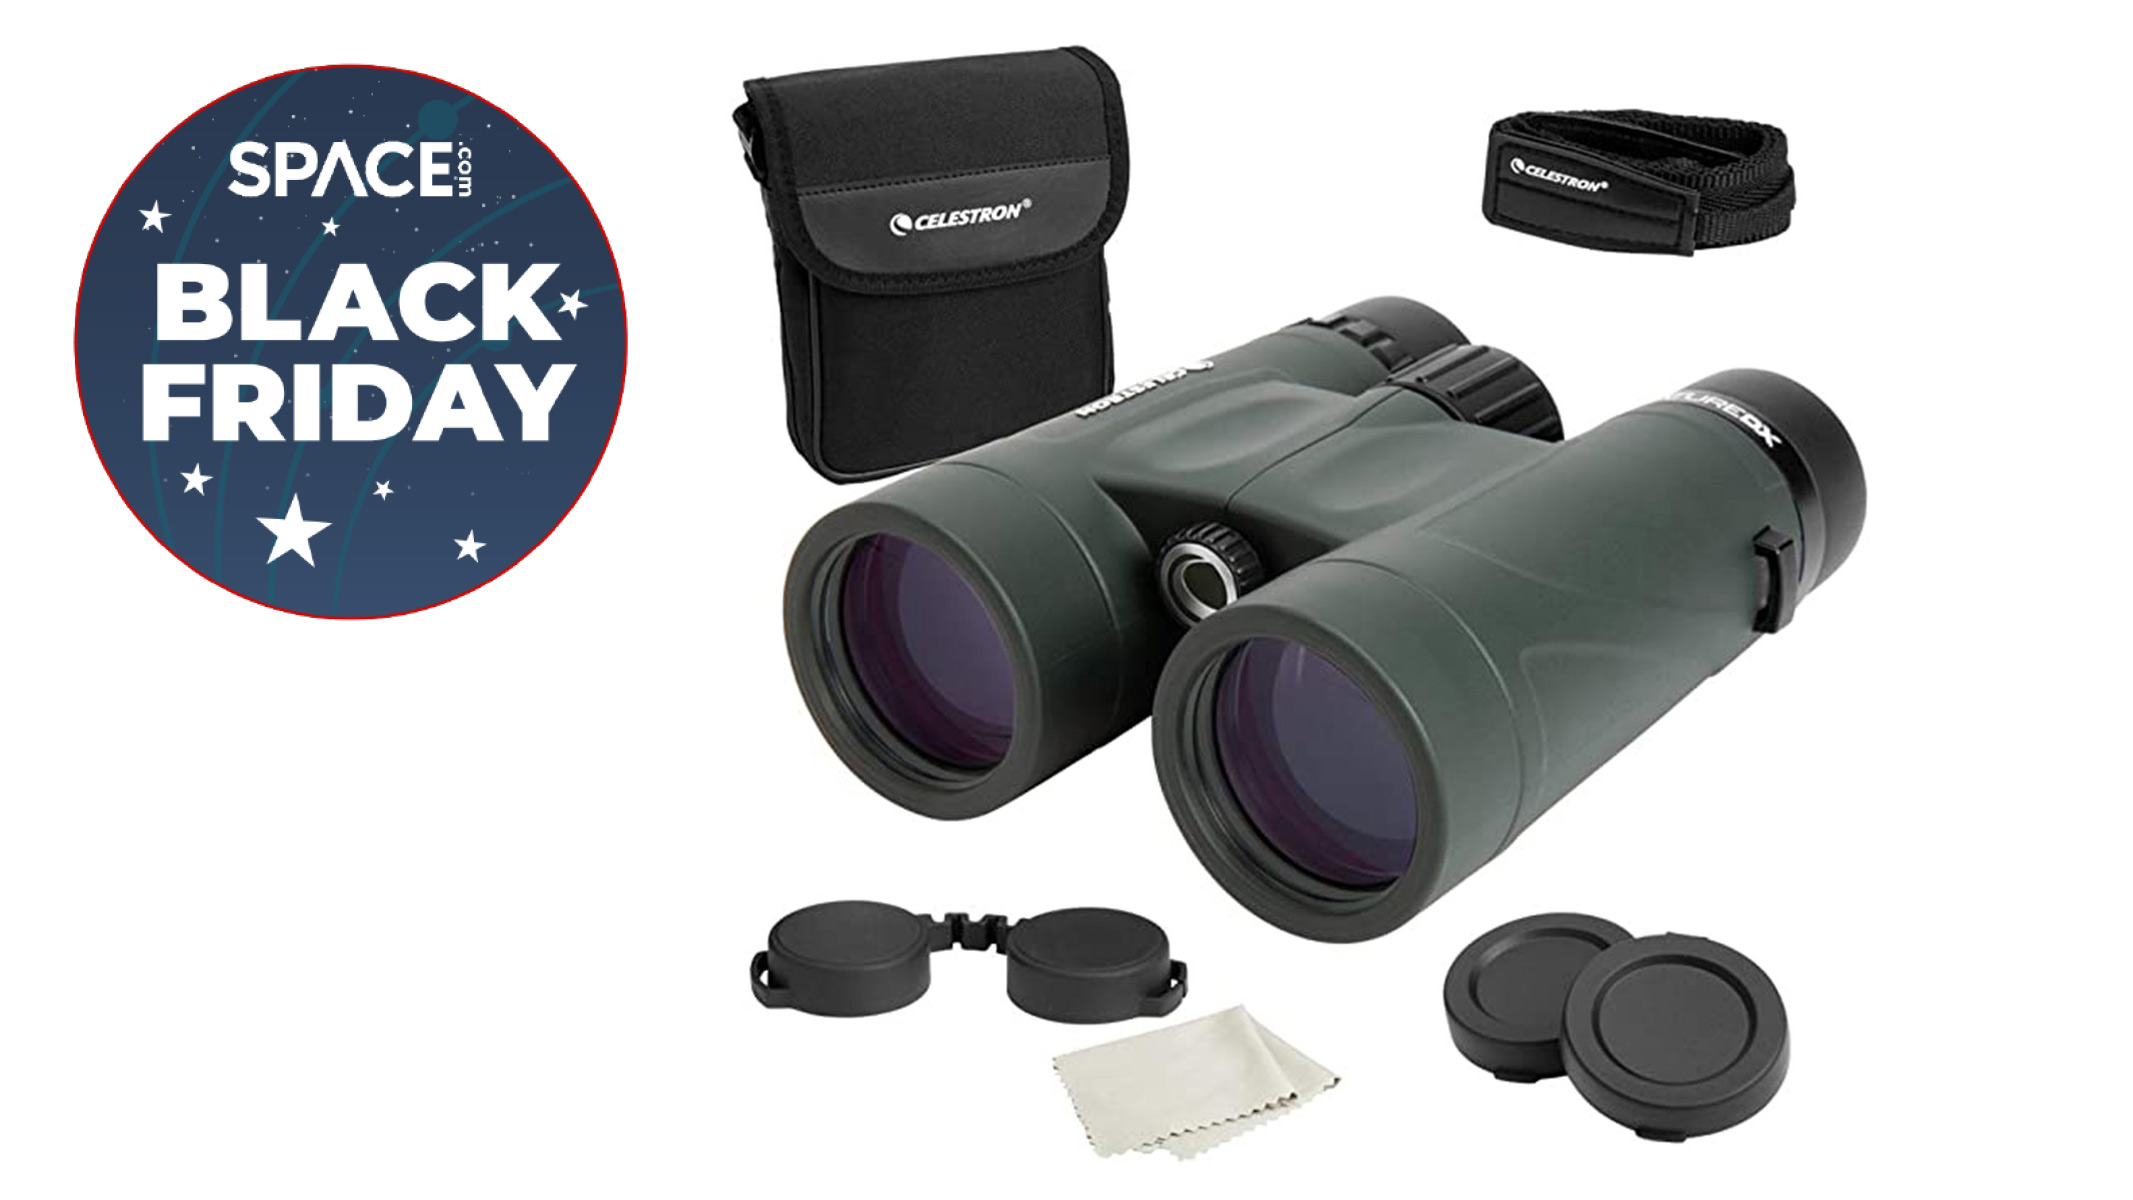 Celestron nature dx 8x42 binoculars on white background with black friday deal badge